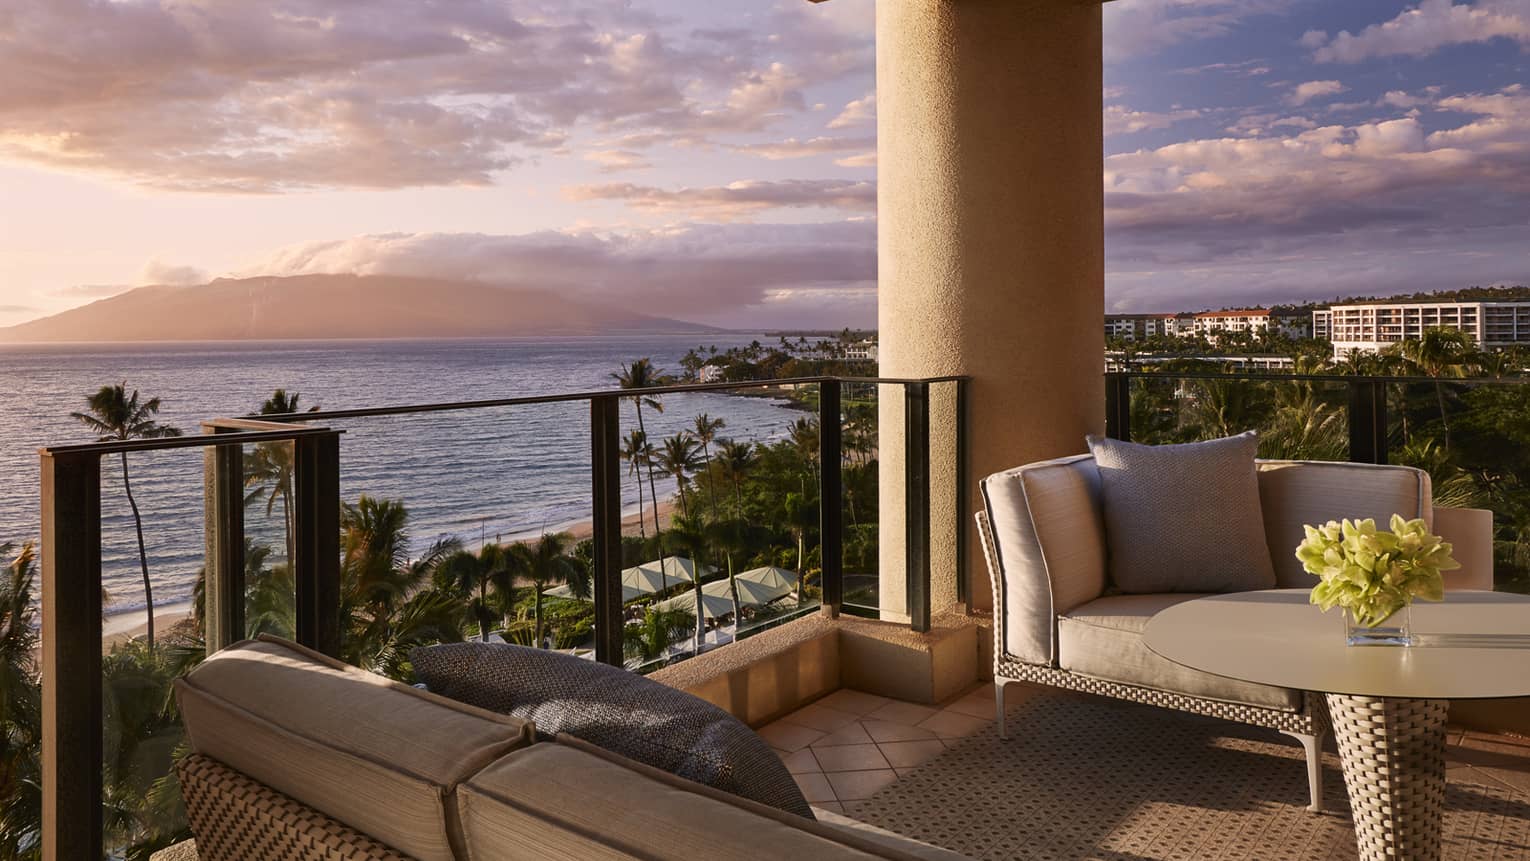 Outdoor terrace with sofa, arm chair, glass railing, looking out to sunset over ocean